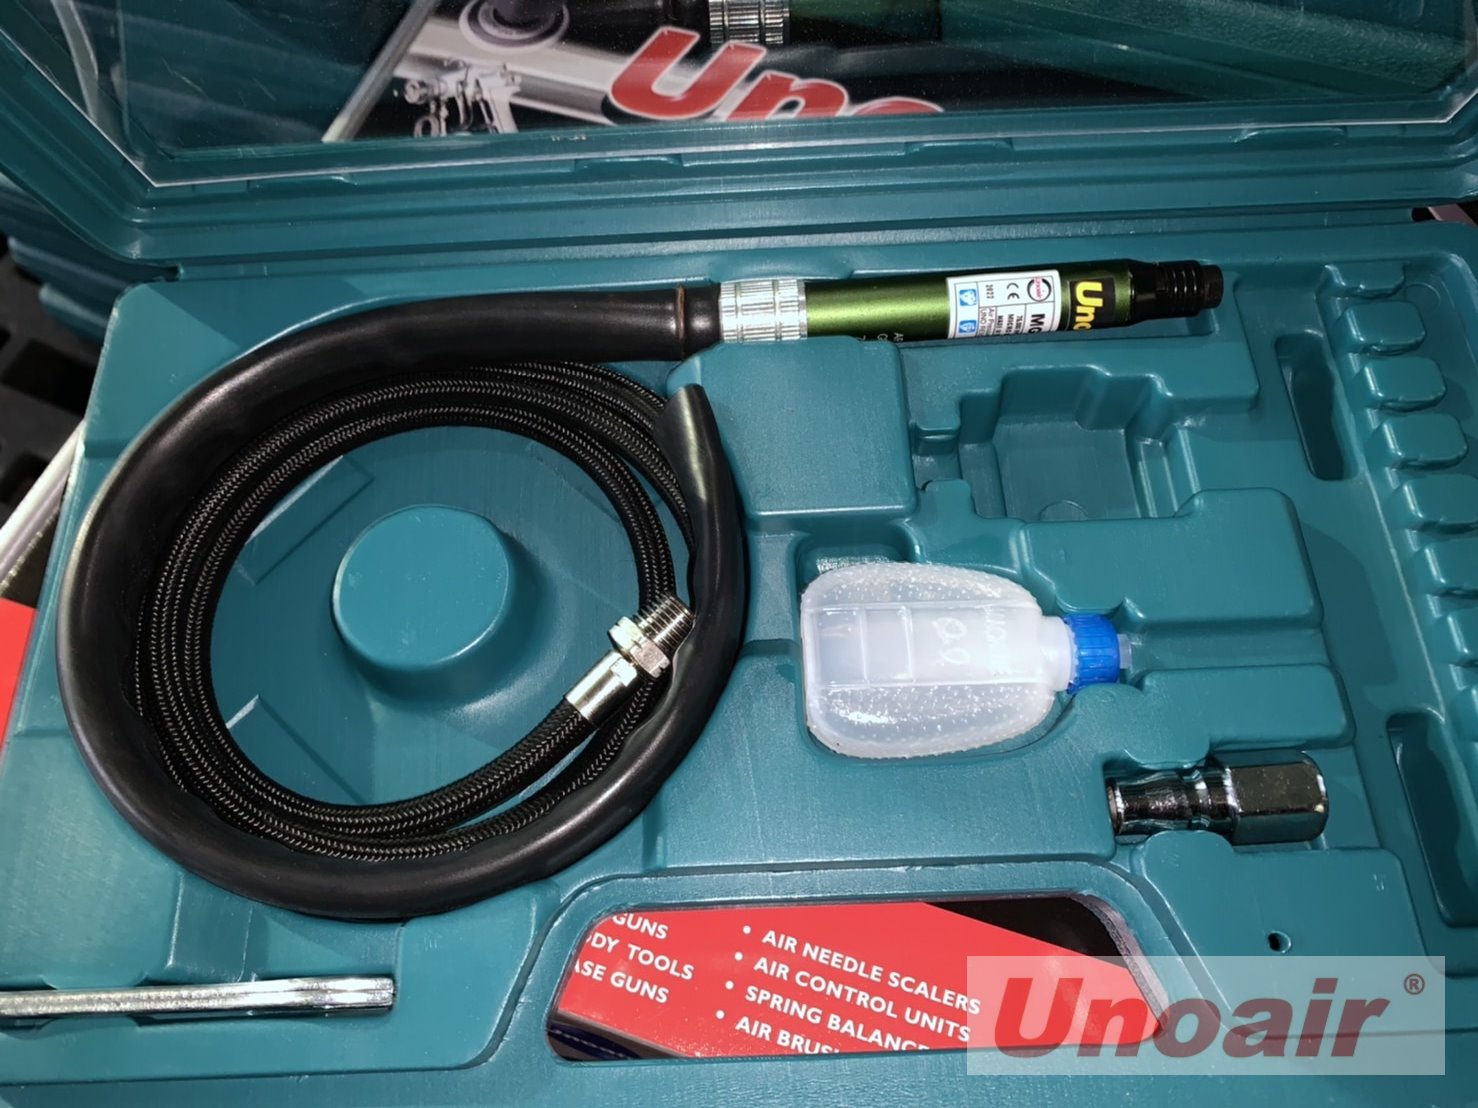 UNOAIR Weekly Update 02/25/2022 air compressor and air tool that make your work easier